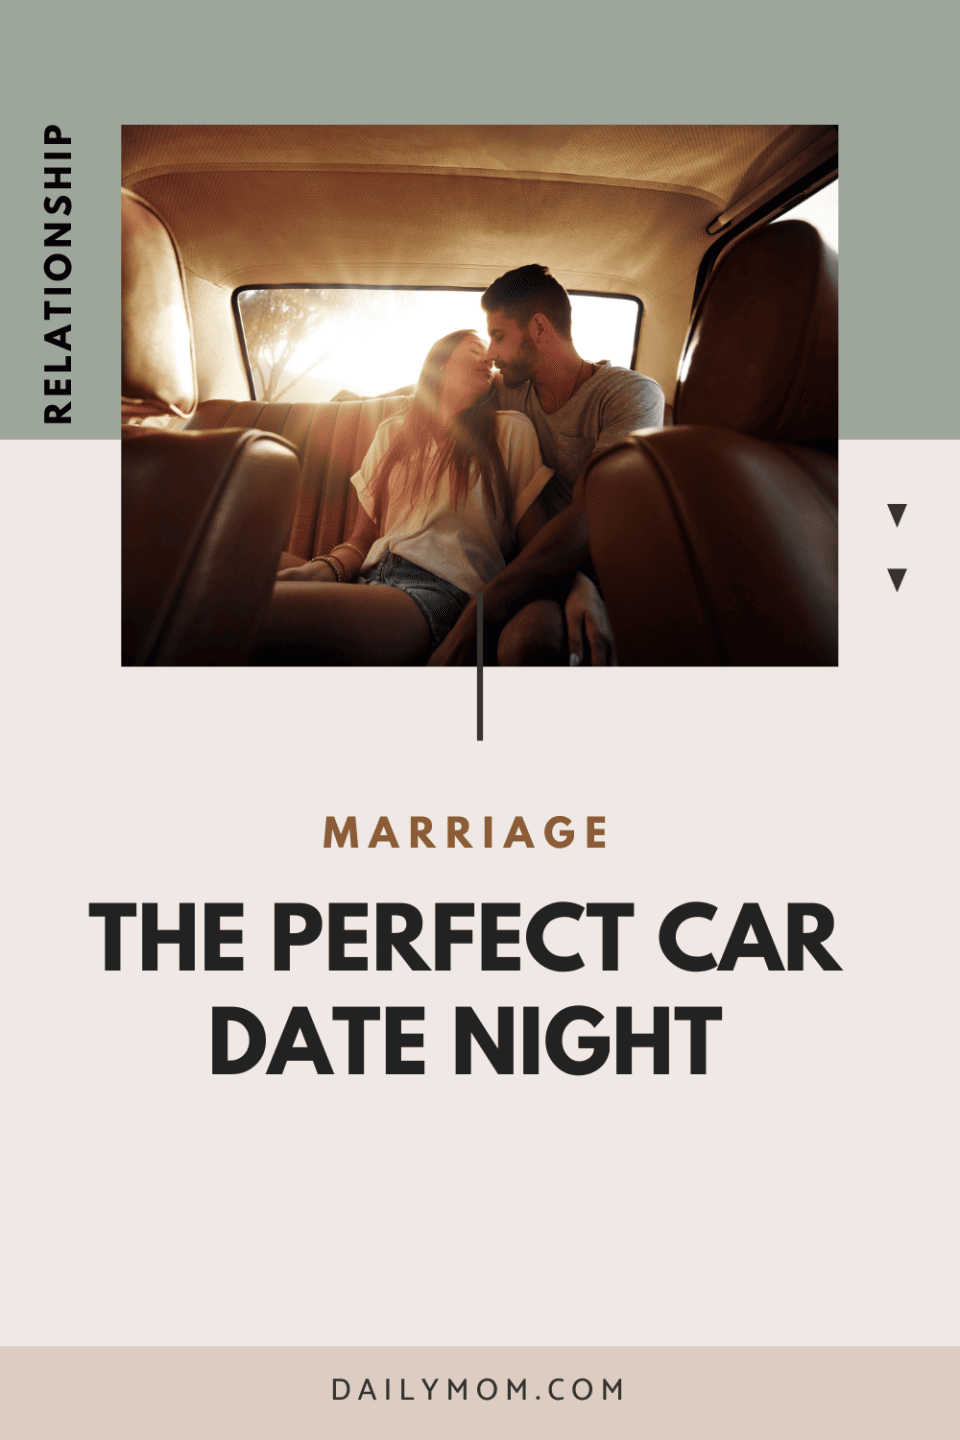 The Perfect Car Date Night Idea: Spontaneous Car Dates 1 Daily Mom, Magazine For Families